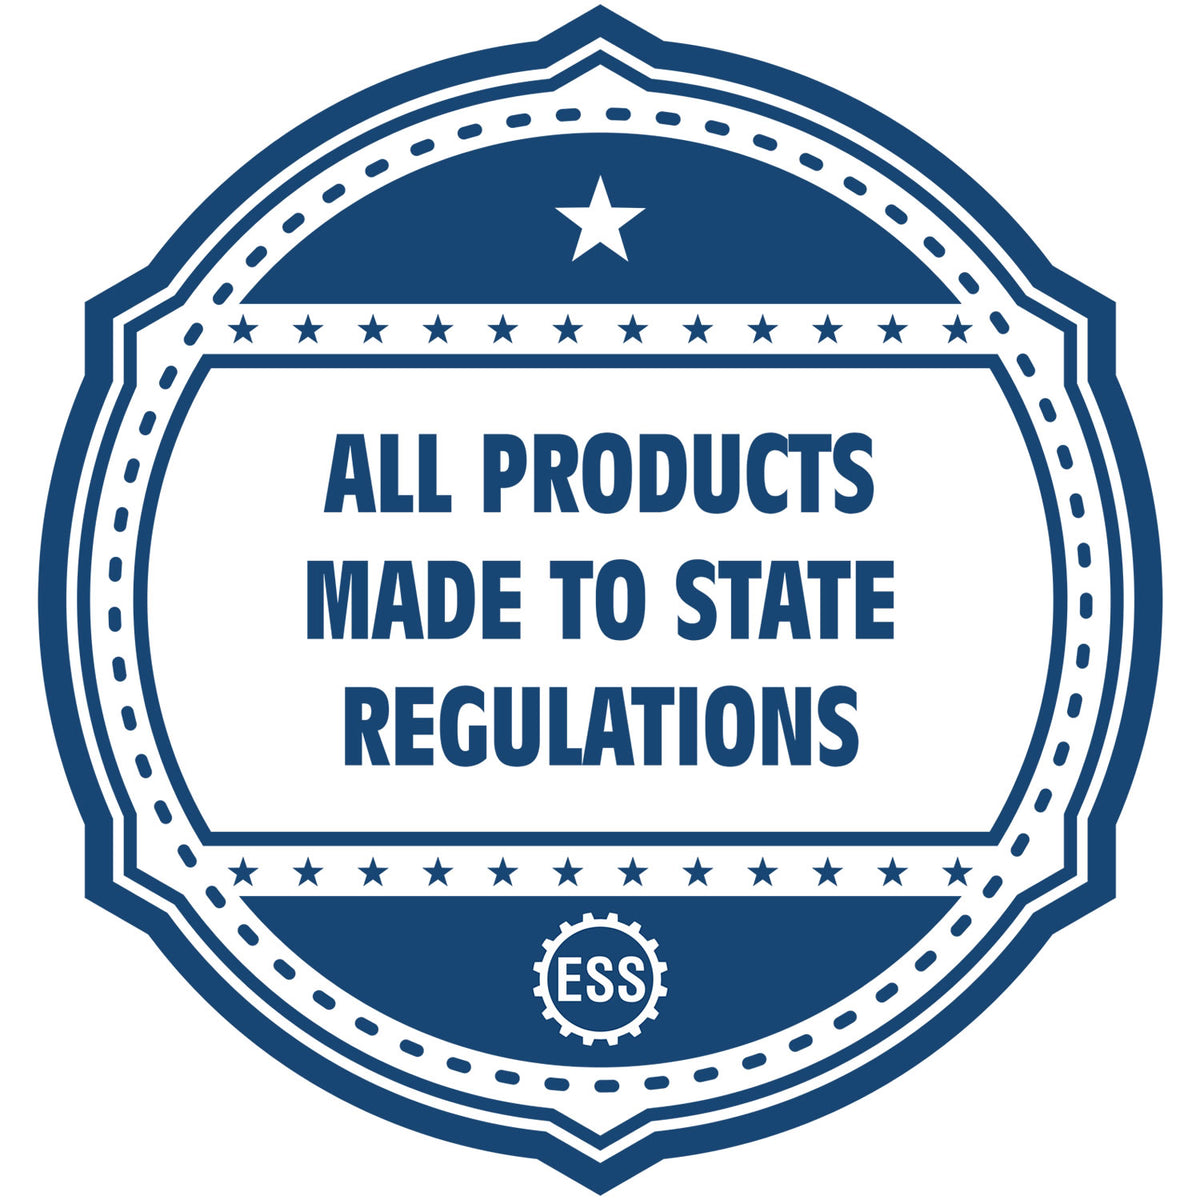 An icon or badge element for the Slim Pre-Inked Florida Landscape Architect Seal Stamp showing that this product is made in compliance with state regulations.